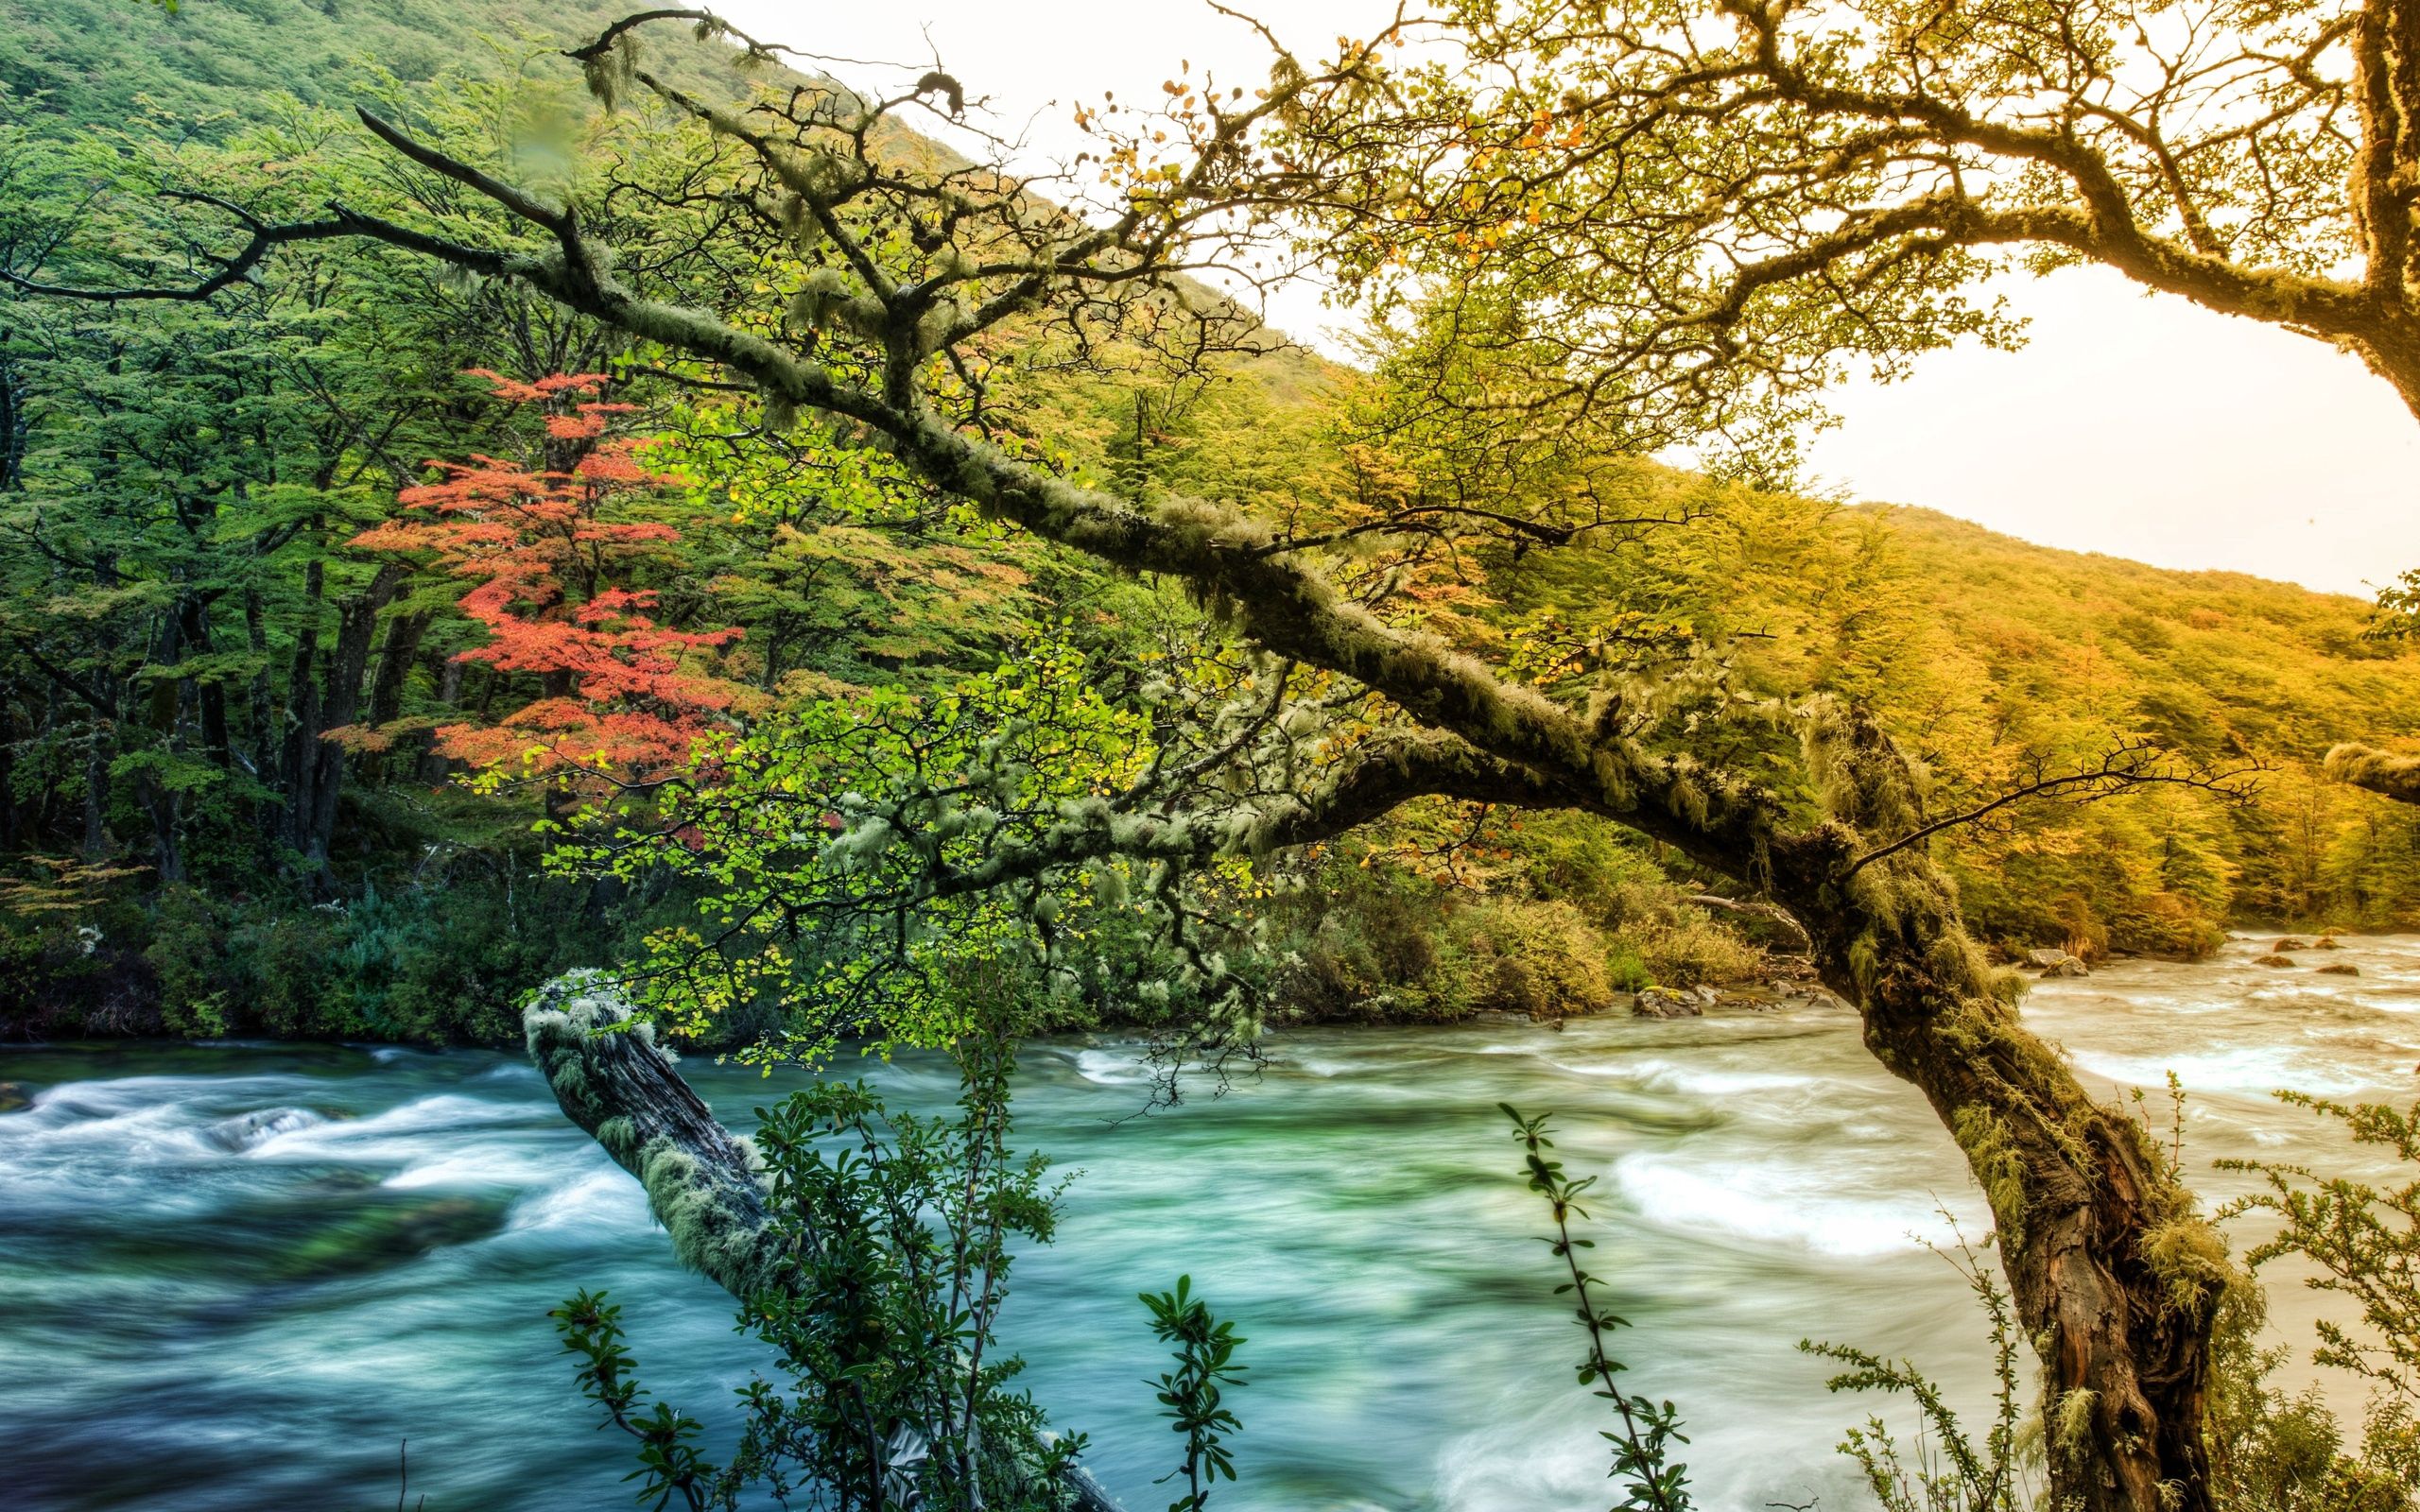 thicket, nature, rivers, mountain, shore, bank, wood, tree, branch, flow, moss, stream, thickets, growths Panoramic Wallpaper